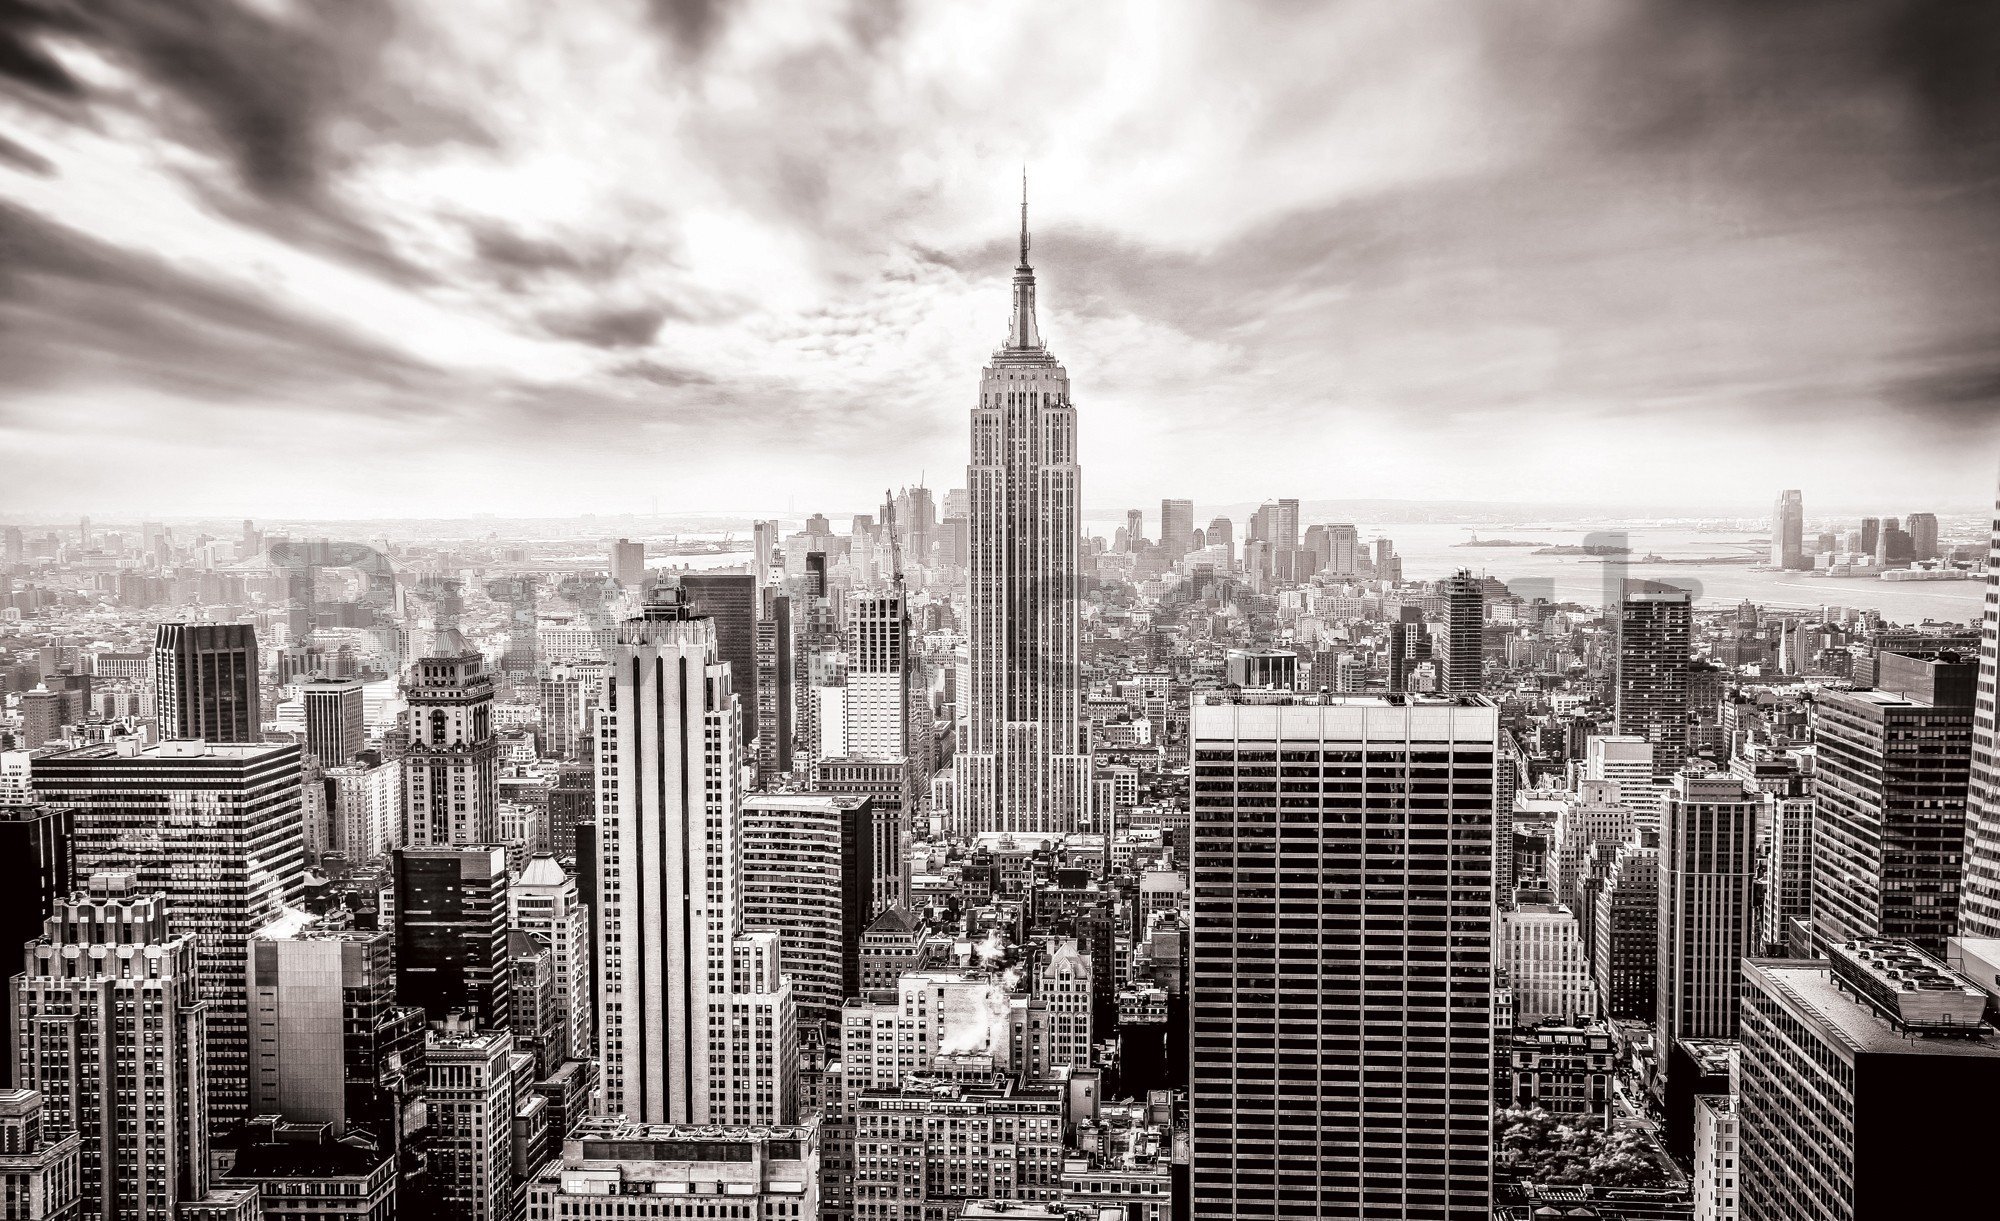 Wall mural vlies: View on New York (black and white) - 416x254 cm